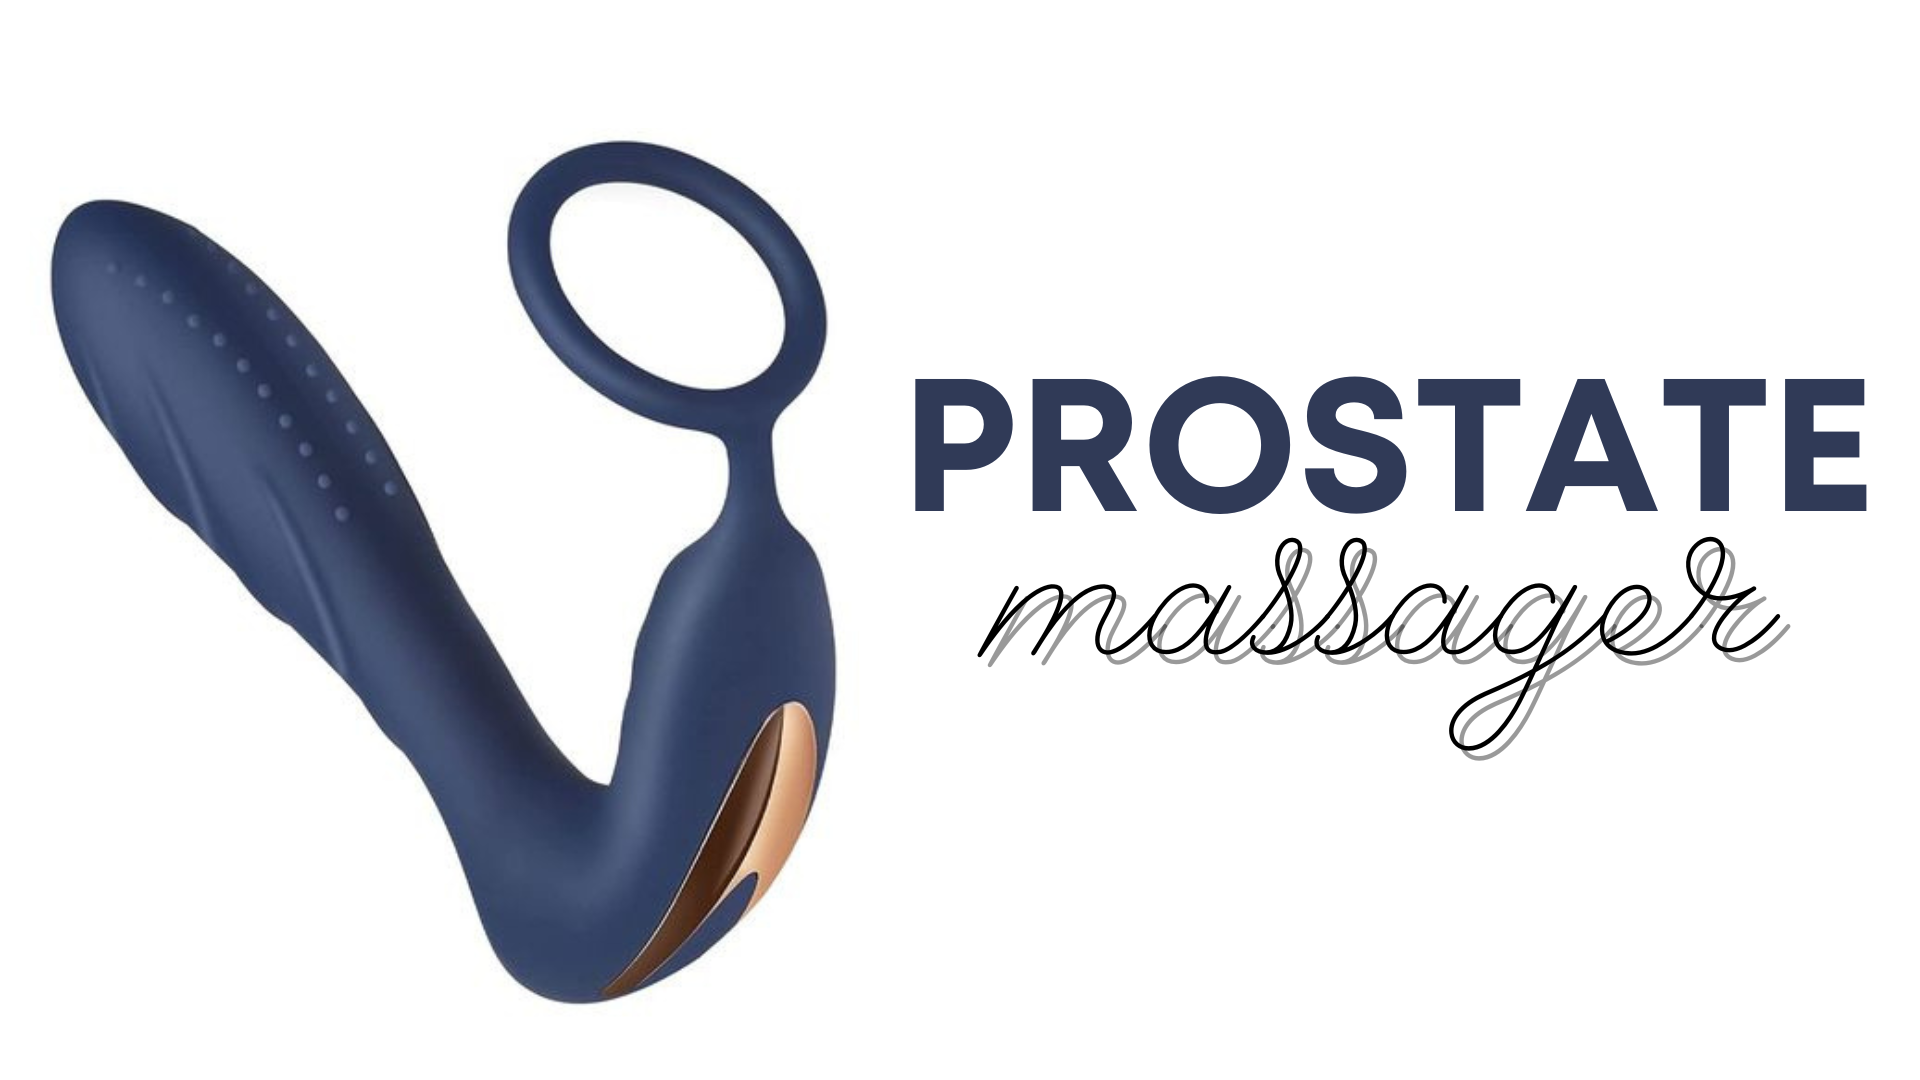 A blue Prostate Massager with words "Prostate Massager" on the right side